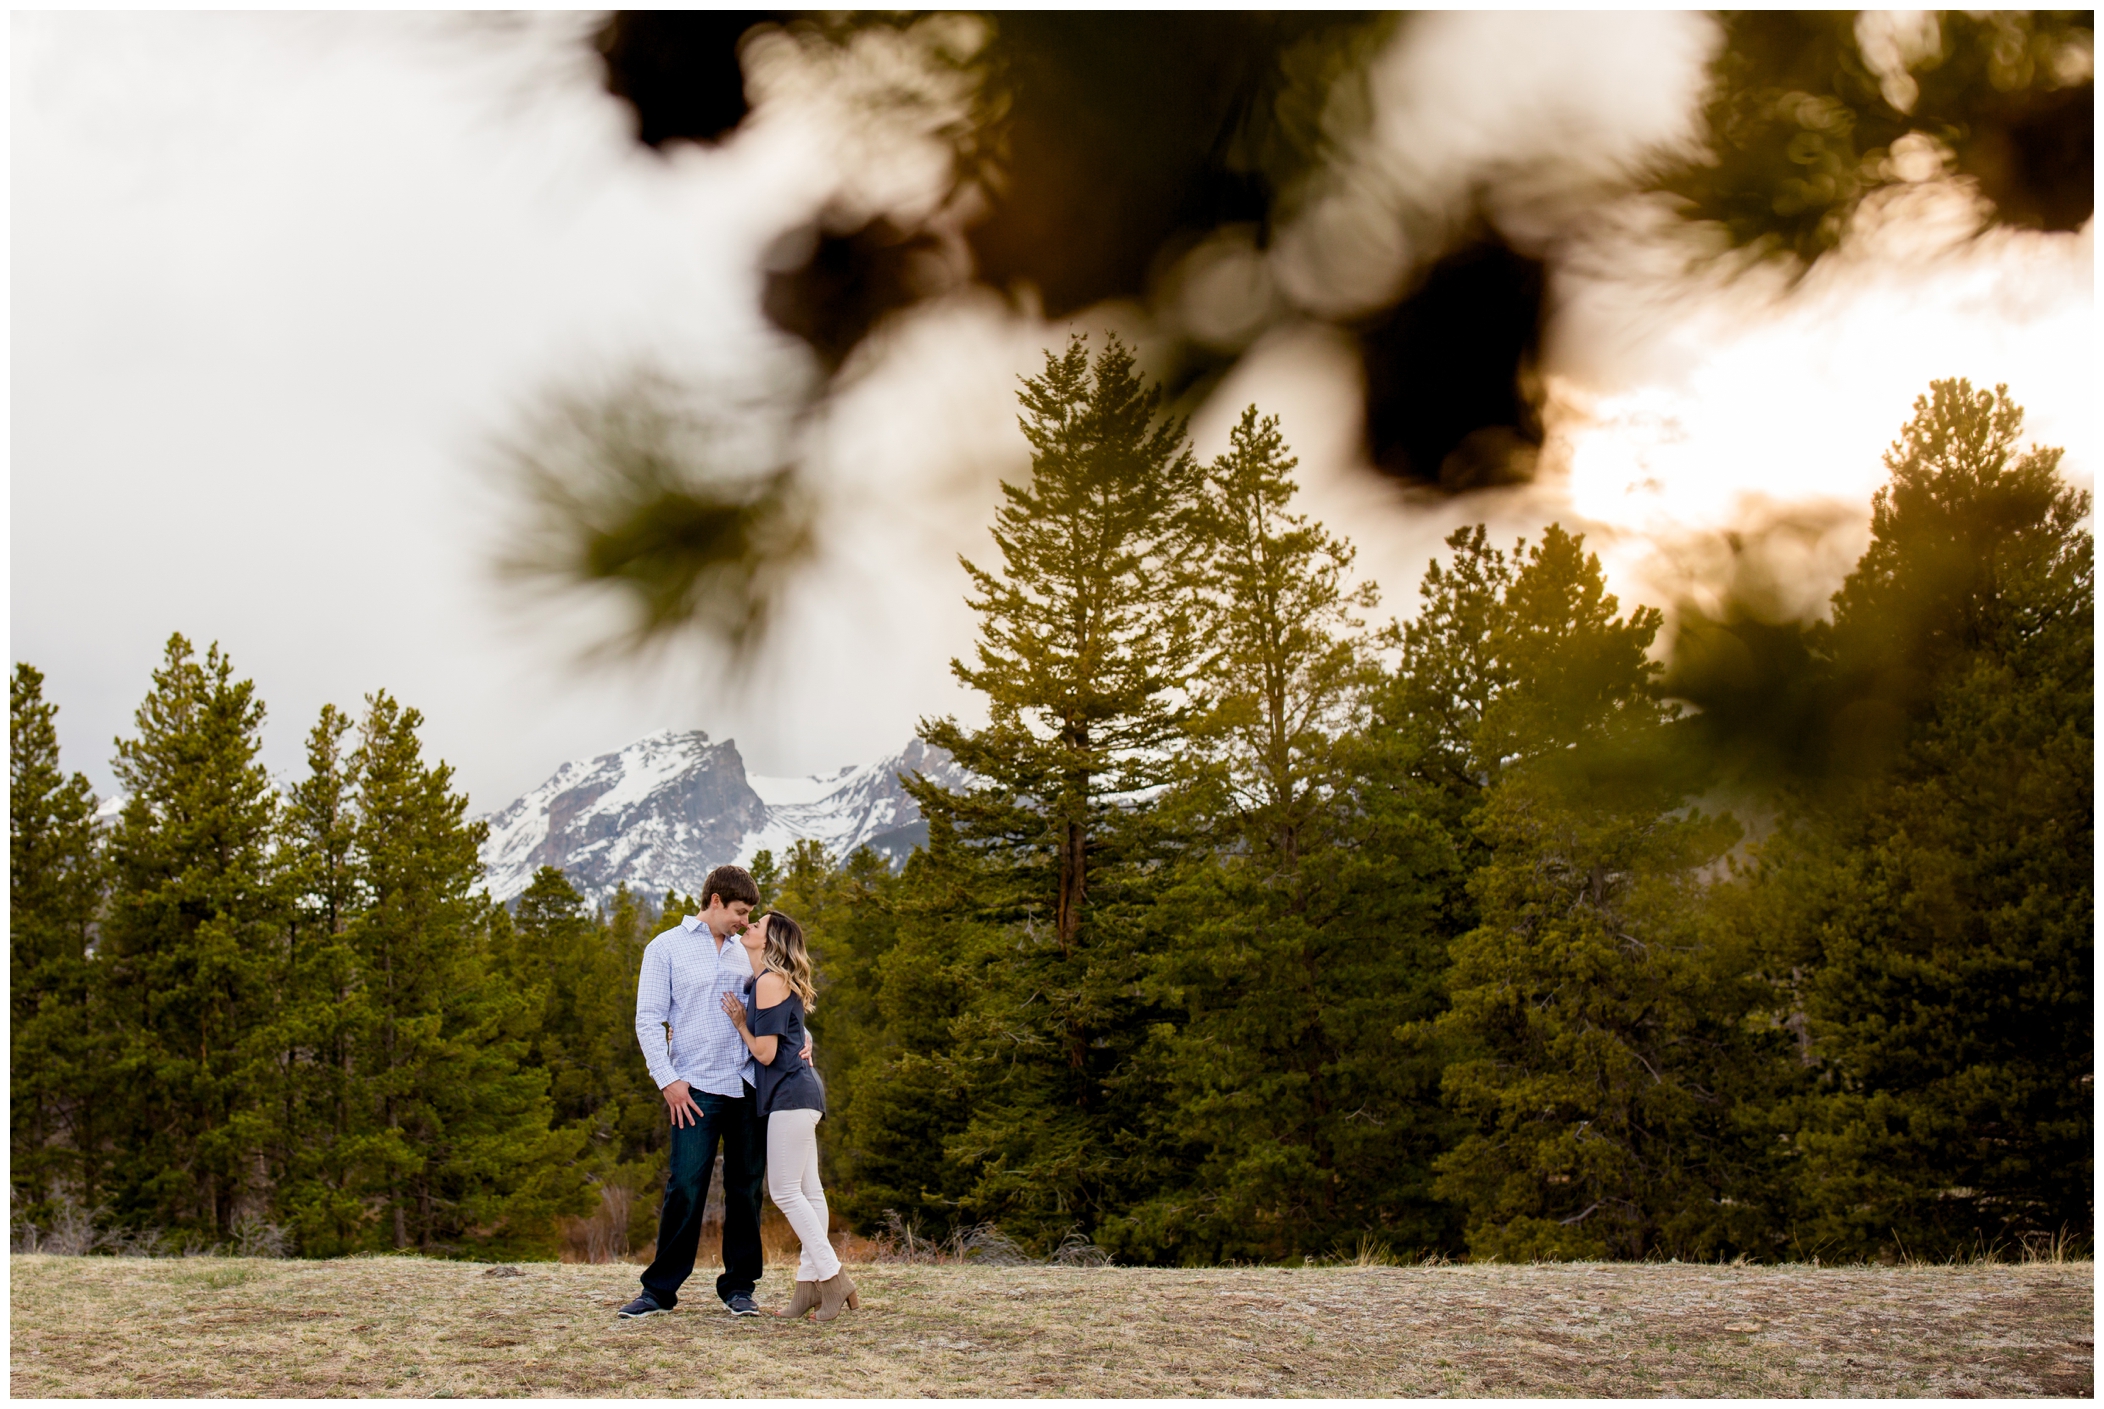 Estes Park engagement portraits in Rocky Mountain National Park at Sprague Lake and Moraine Park. Spring mountain couples photos by Plum Pretty Photography.